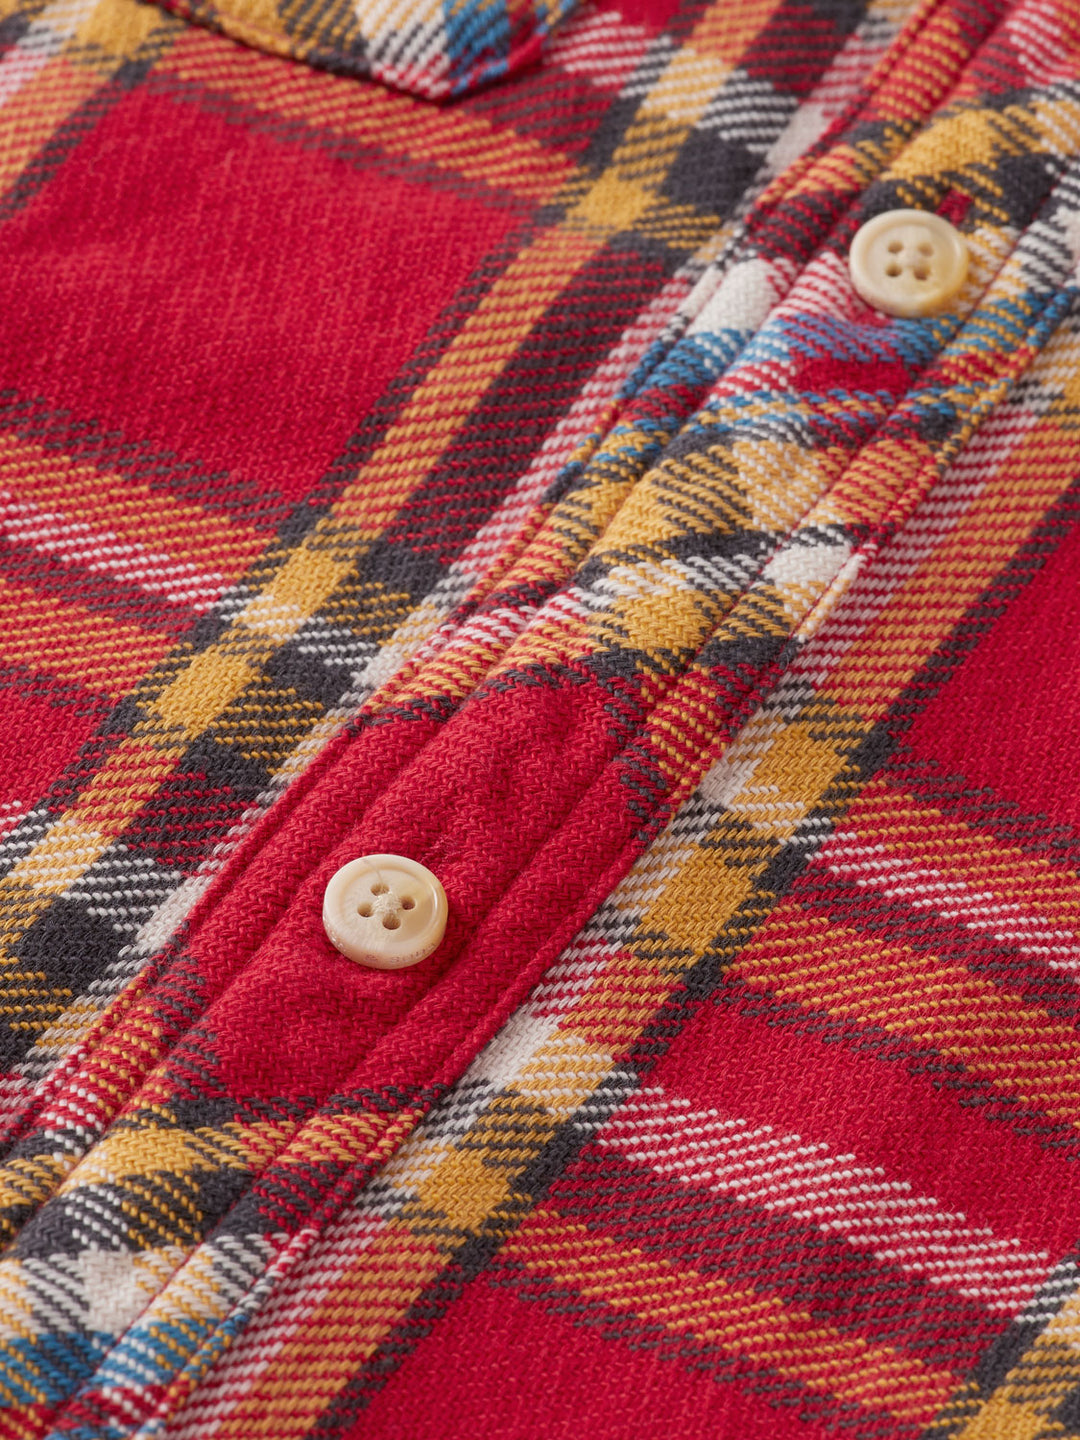 Flannel Check Roll Up Shirt in Red Check | Buster McGee